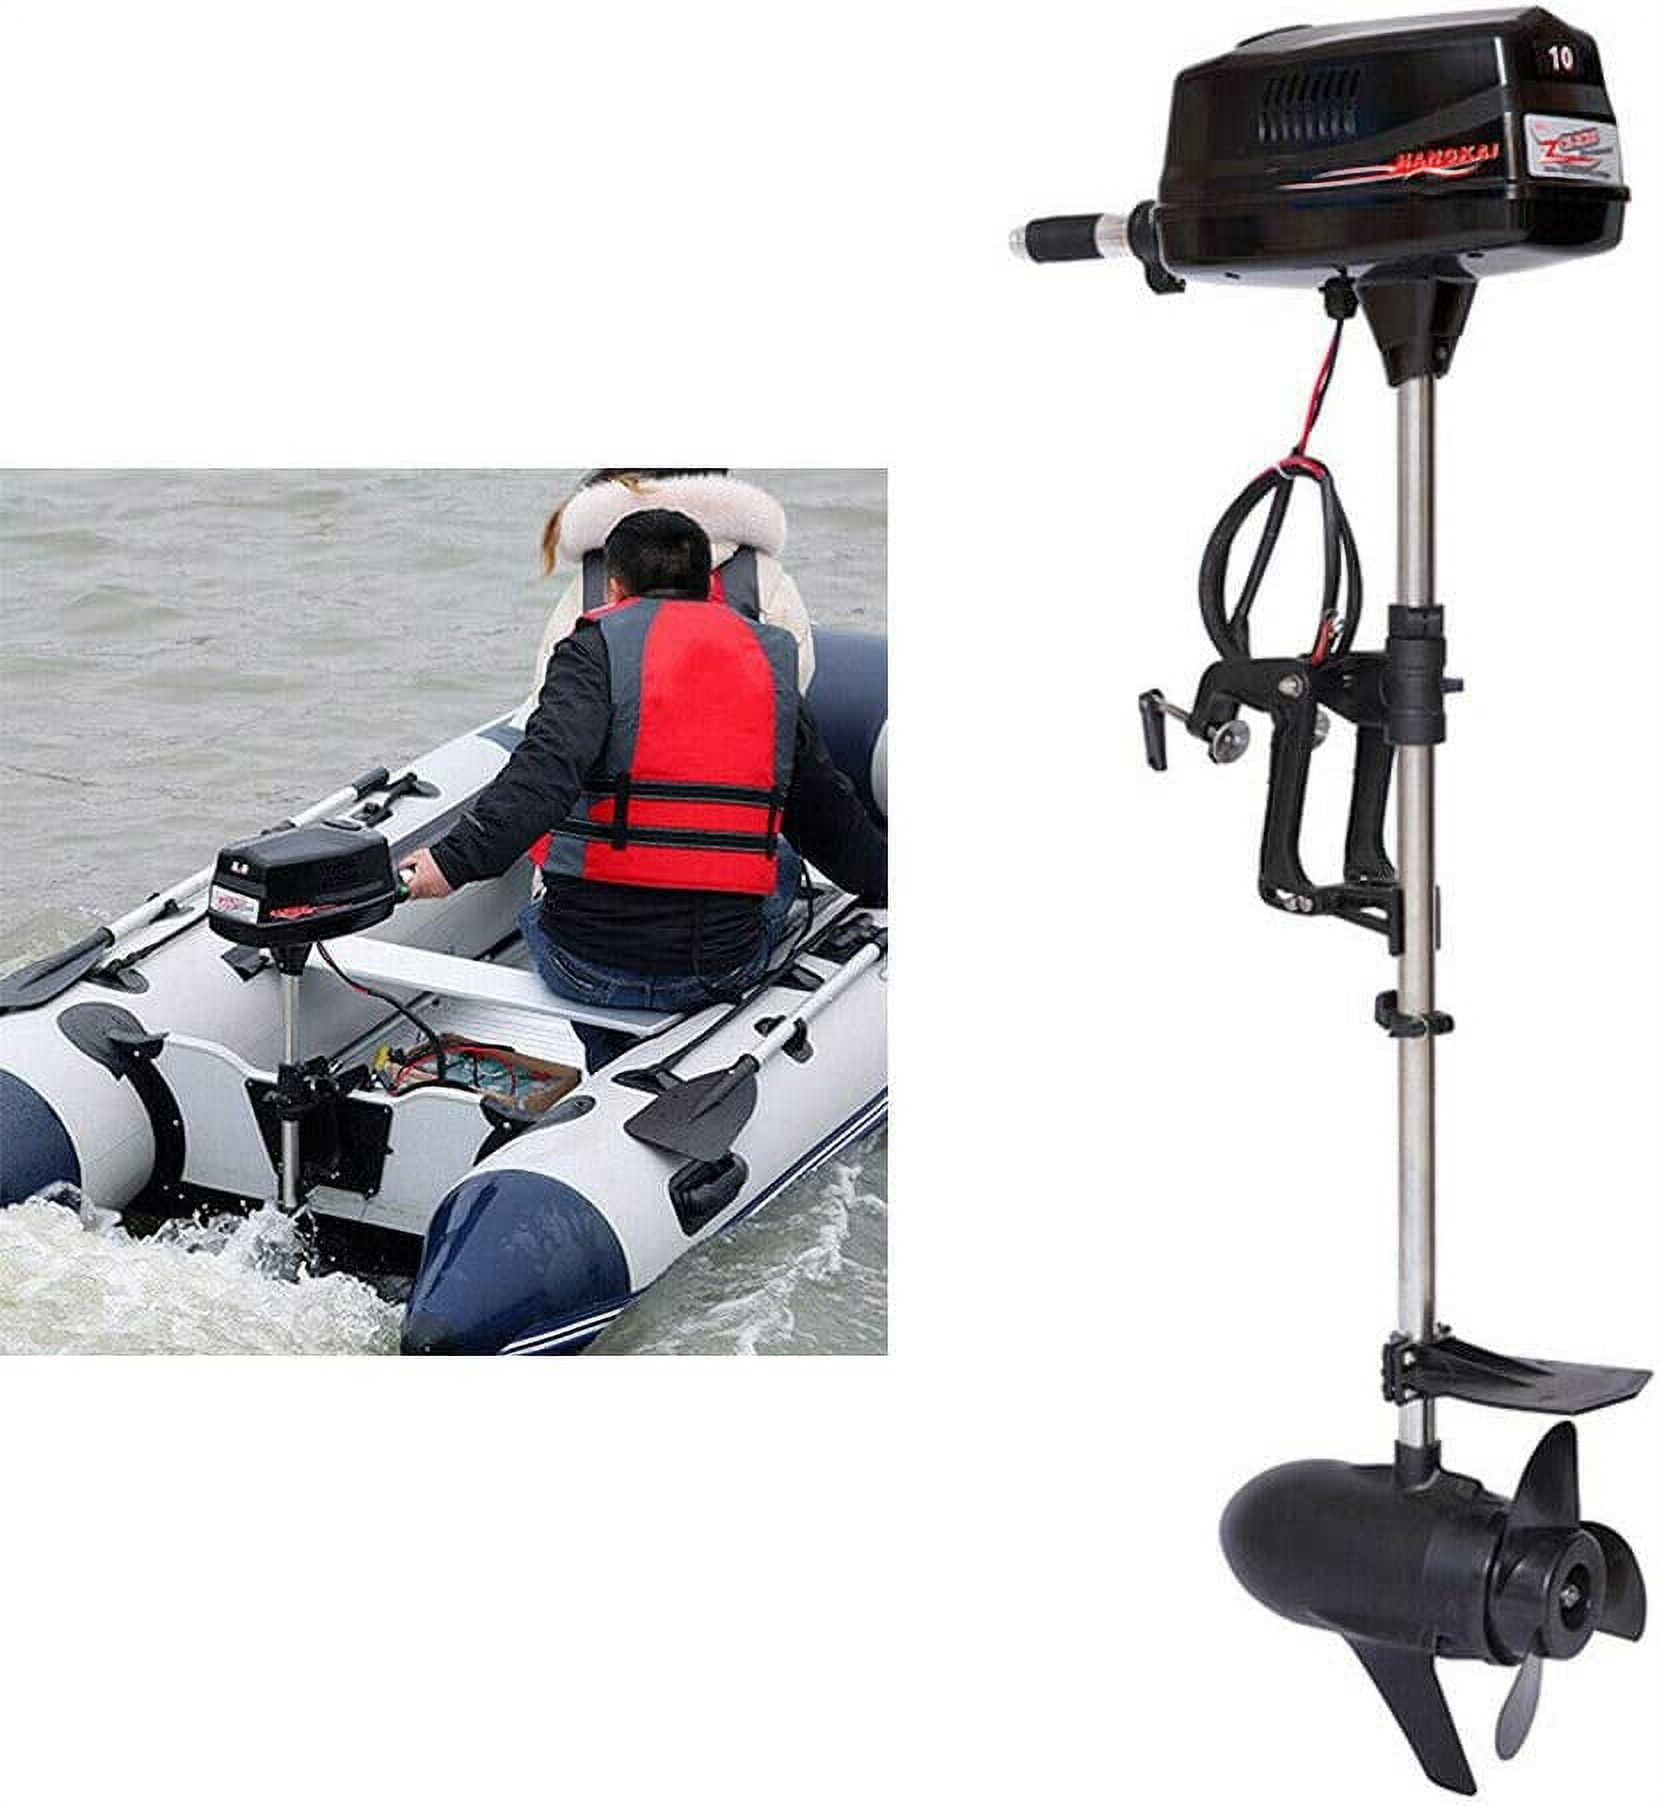 Outboard small boat - PRO 102 - KL Outdoor - electric / sport